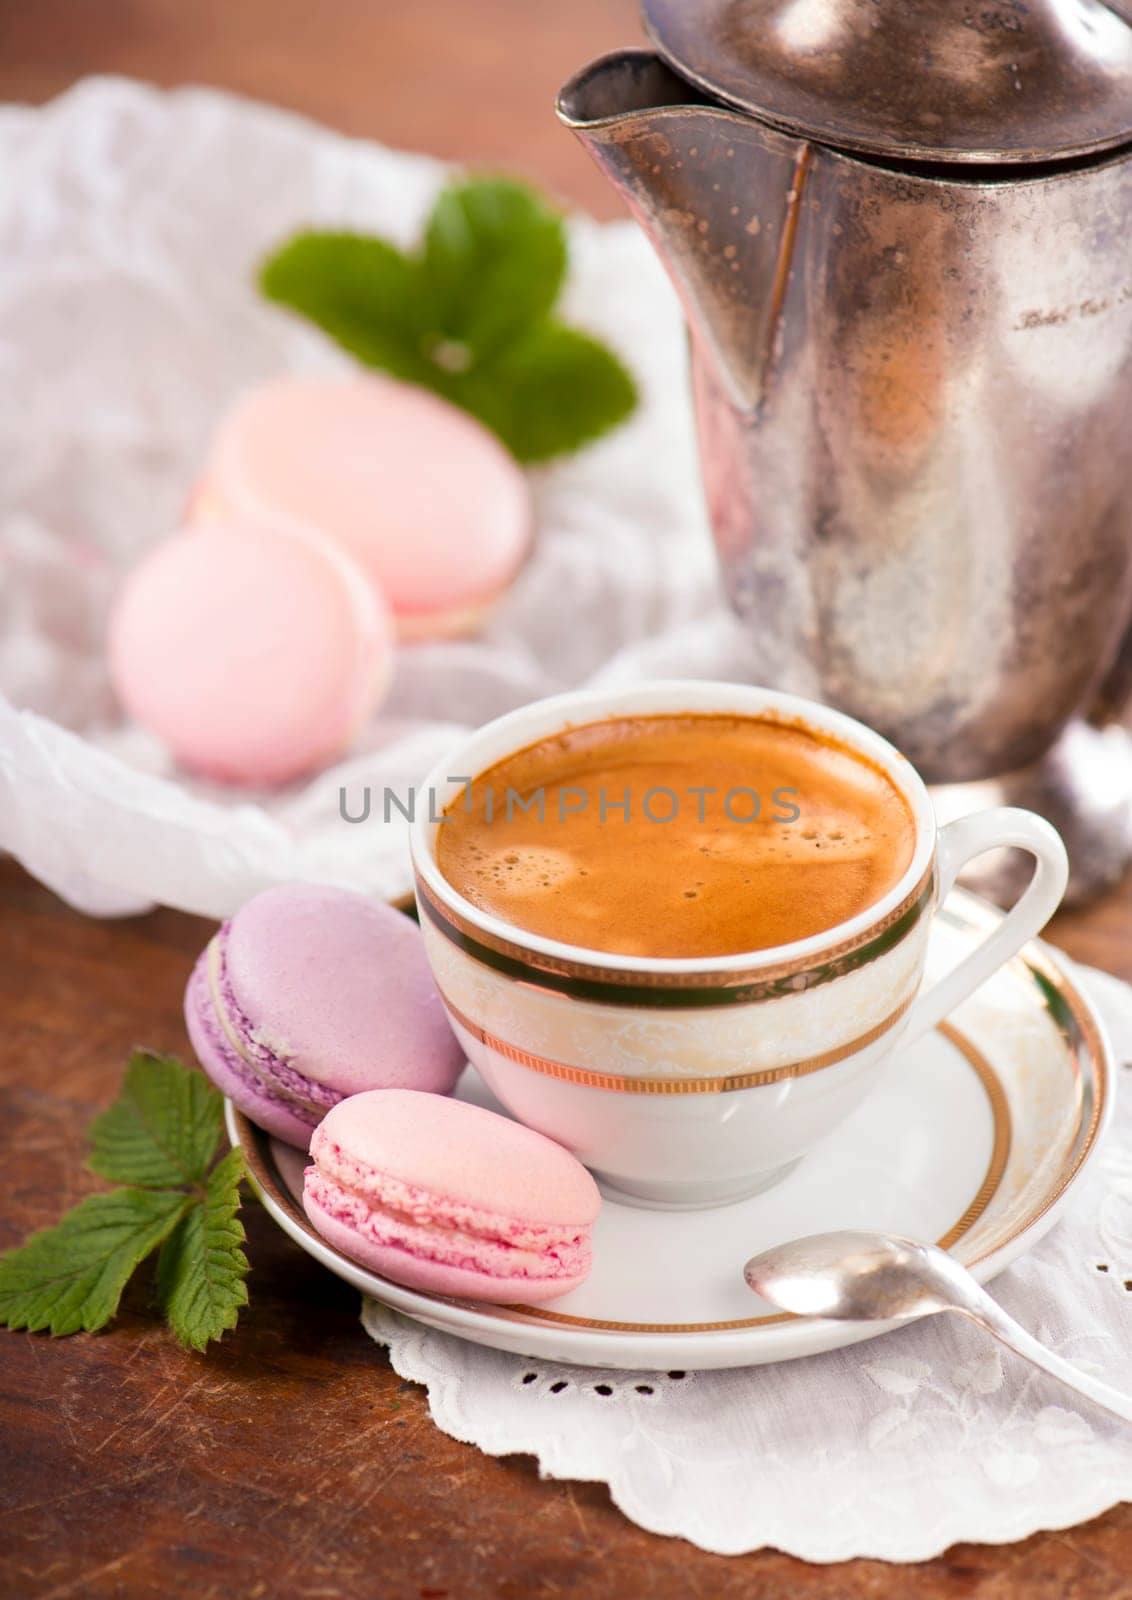 Macaroon on a wooden background by aprilphoto